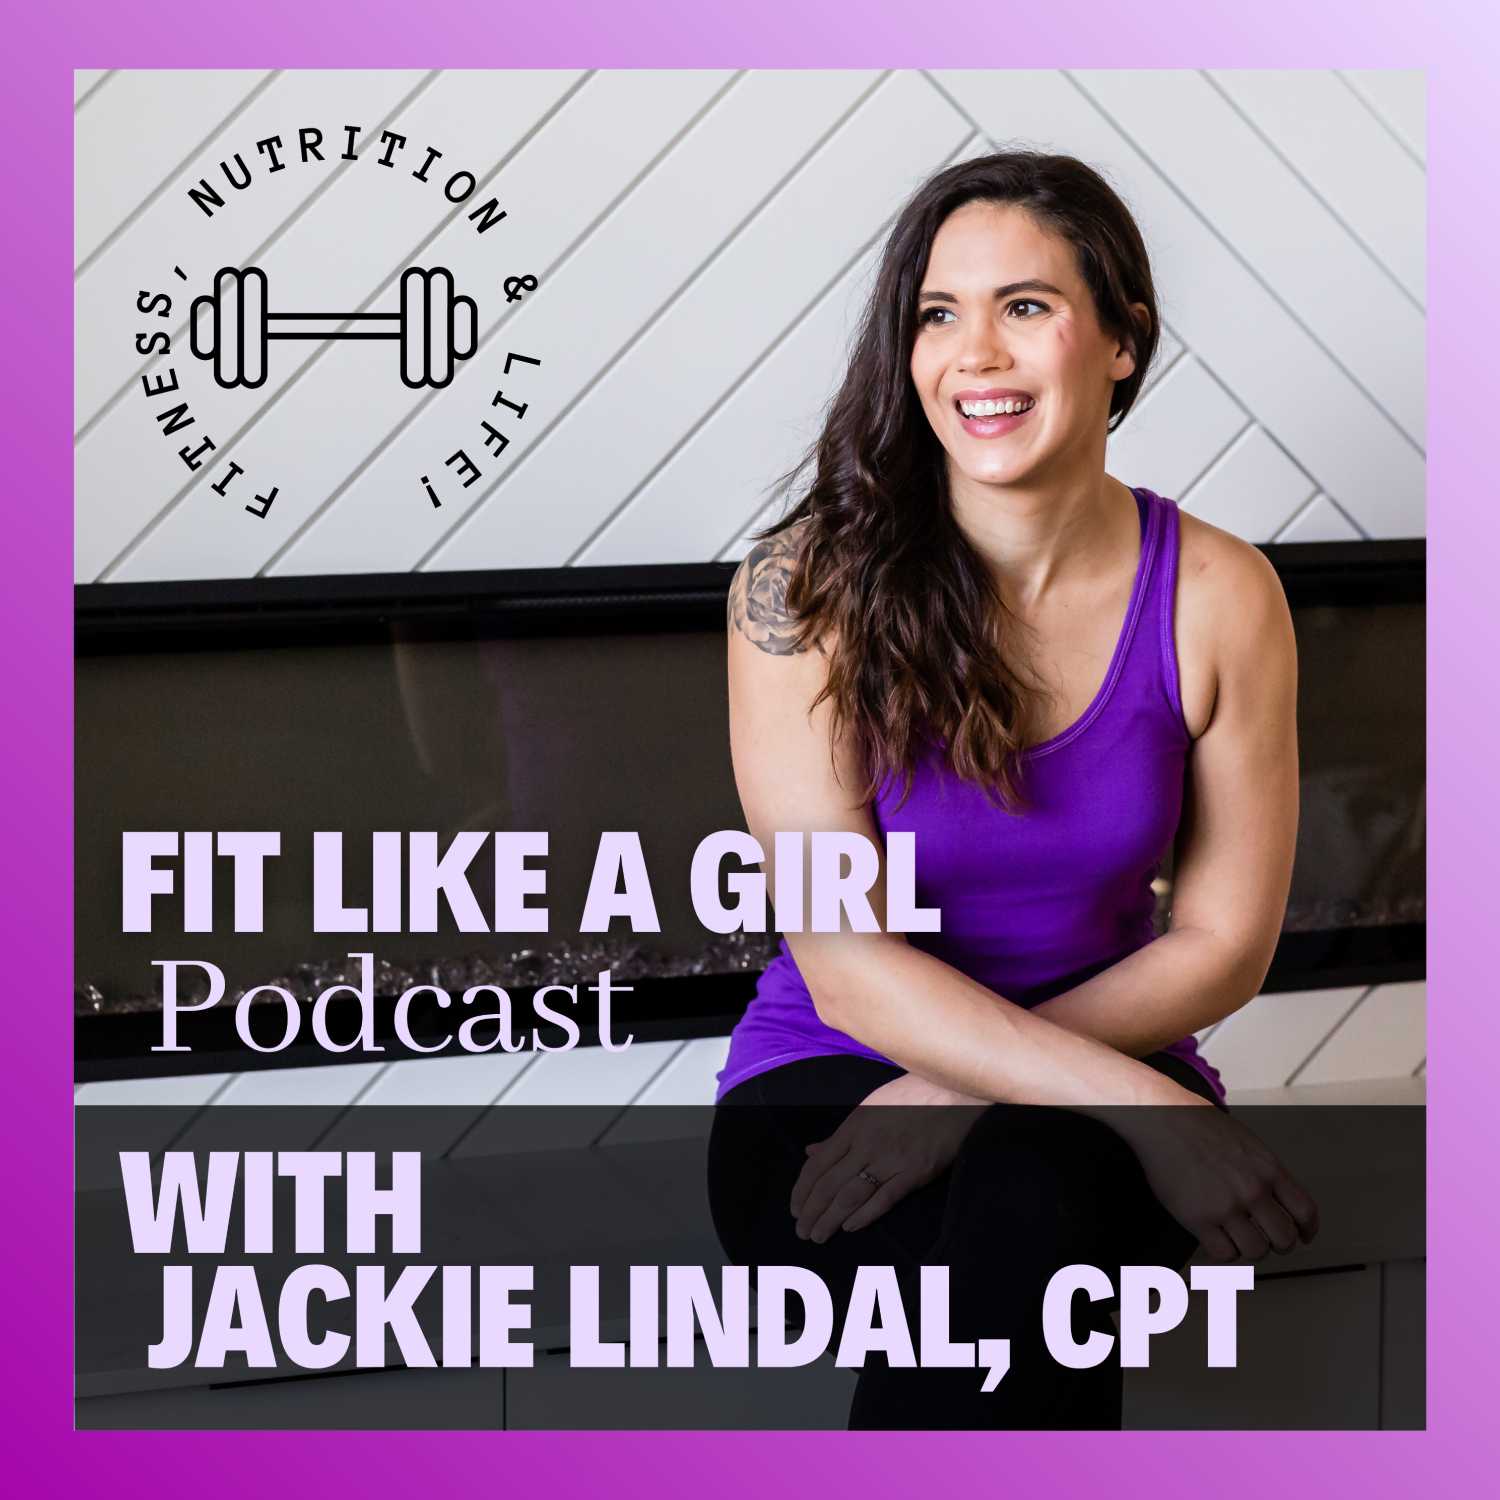 Q&A Episode: My Thoughts on Intermittent Fasting, Weekly Weigh-ins, Best foods for Weight loss & more!